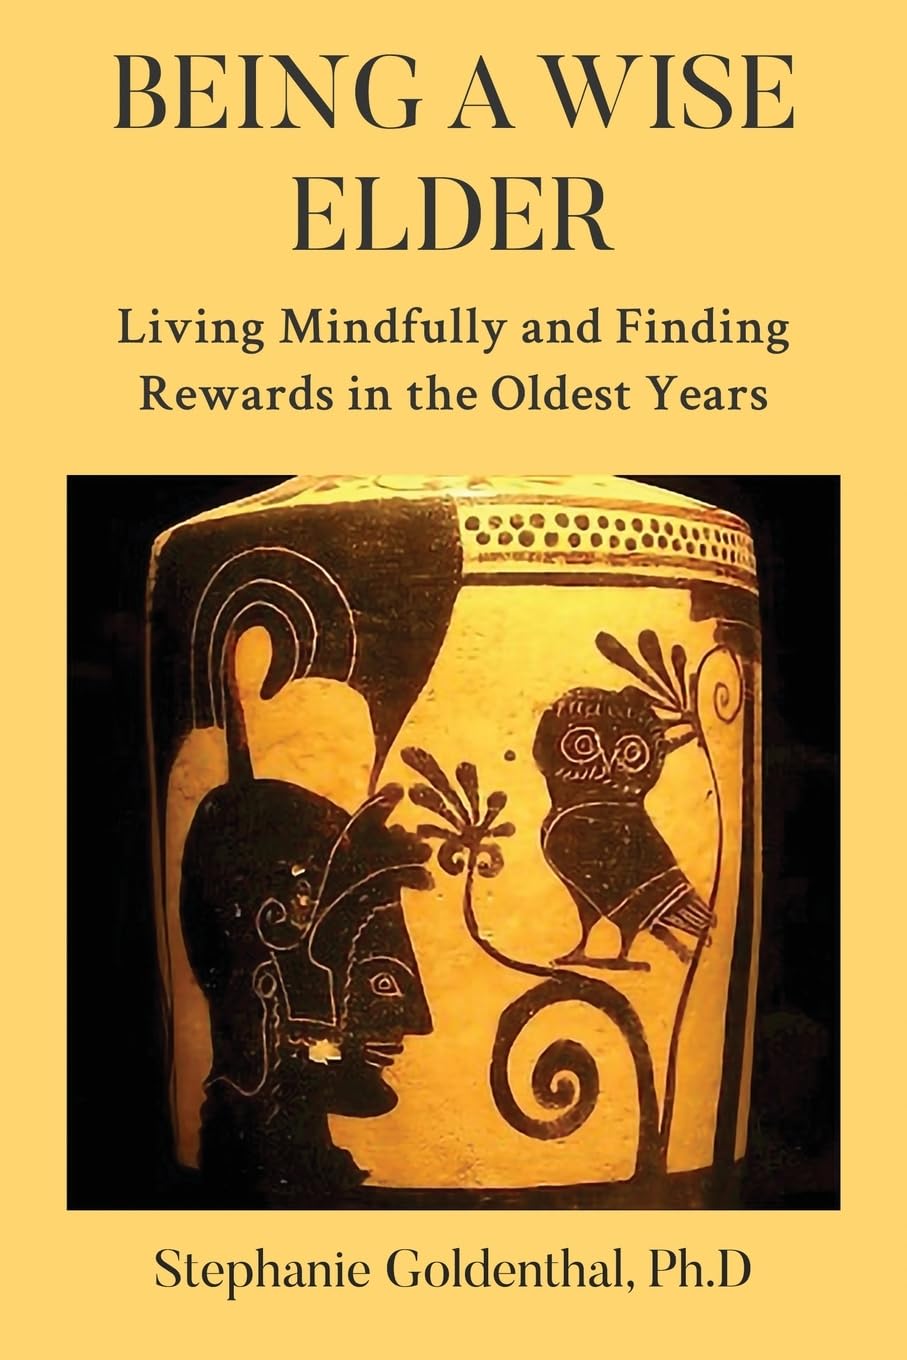 New book "Being a Wise Elder" by Stephanie Goldenthal, Ph.D. is released, a powerful view of aging that is grounded in psychological research and enriched by personal experience